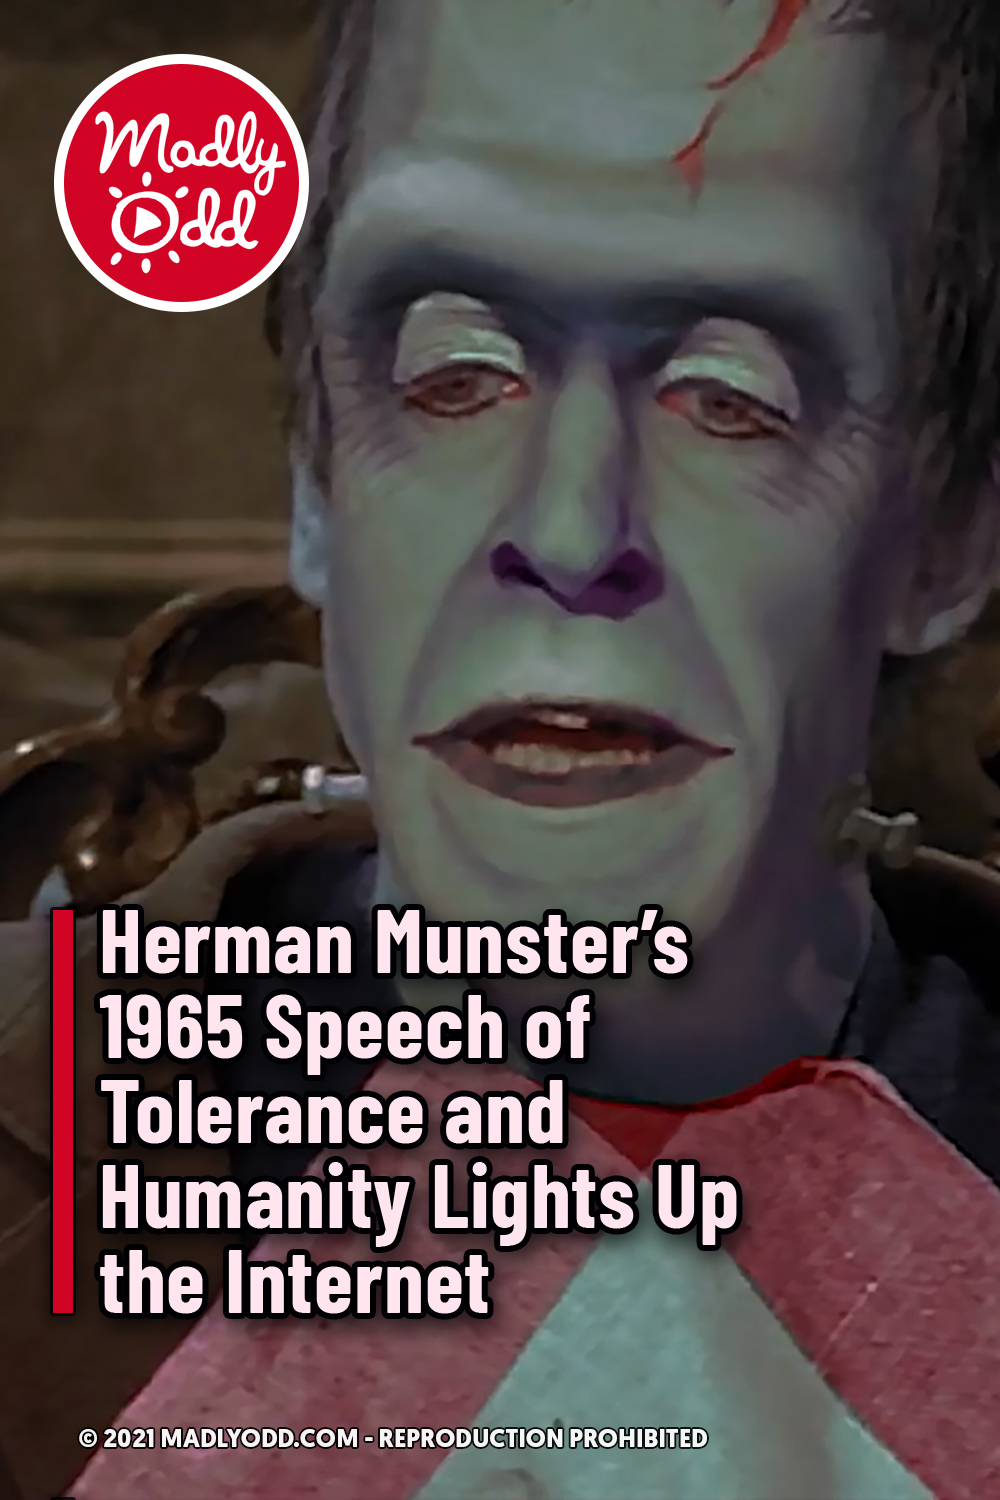 Herman Munster’s 1965 Speech of Tolerance and Humanity Lights Up the Internet